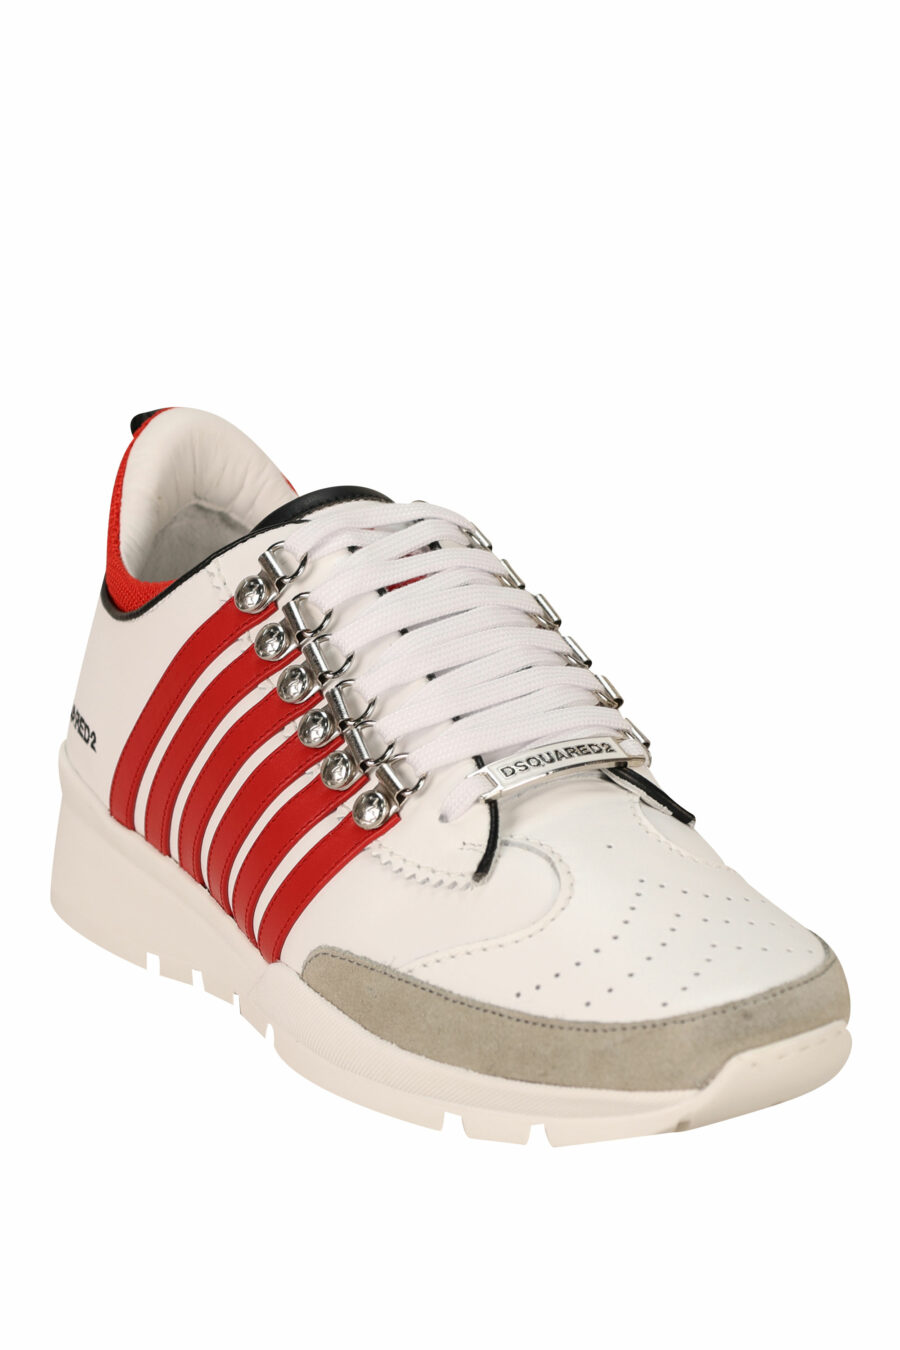 White trainers with red lines and white sole - 8055777300985 1